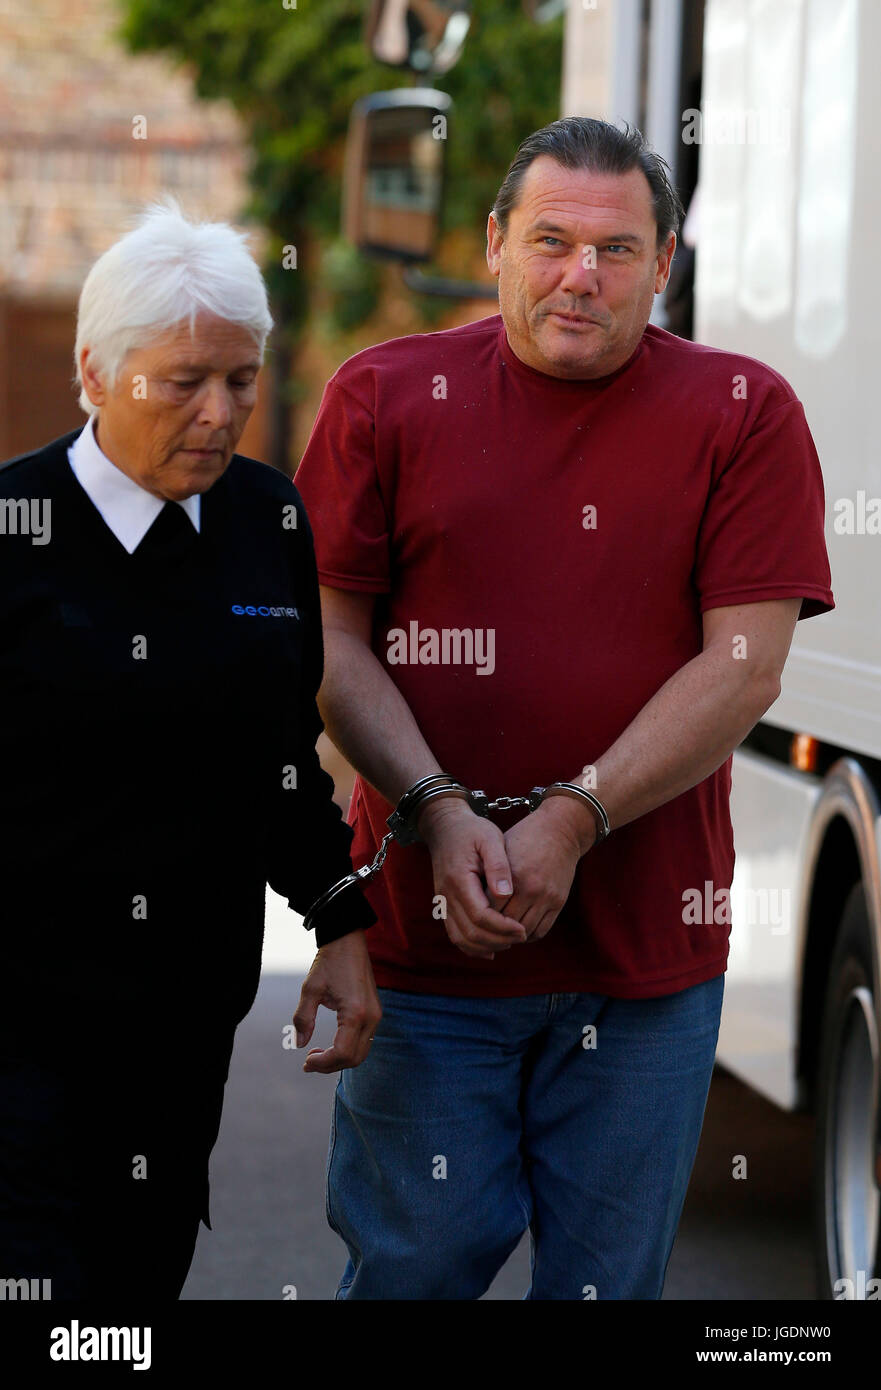 Robert Trigg arrives at Lewes Crown Court in Lewes charged with the murder of Susan Nicholson and the manslaughter of Caroline Devlin. 05 Jul 2017 Stock Photo